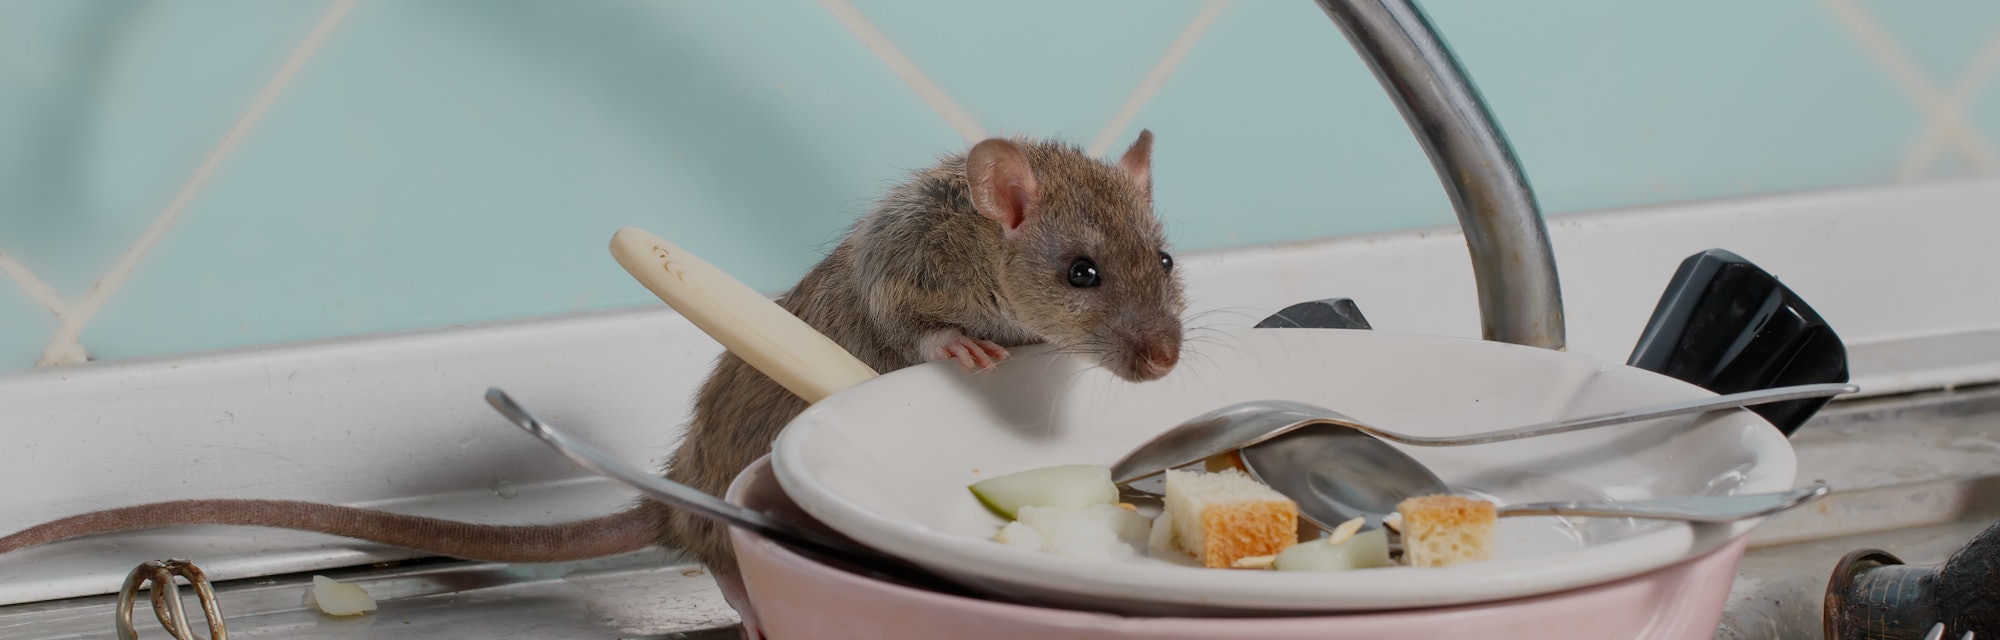 Young rat (Rattus norvegicus) climbs into the dish with the leftovers of food on a plate on sink at ...